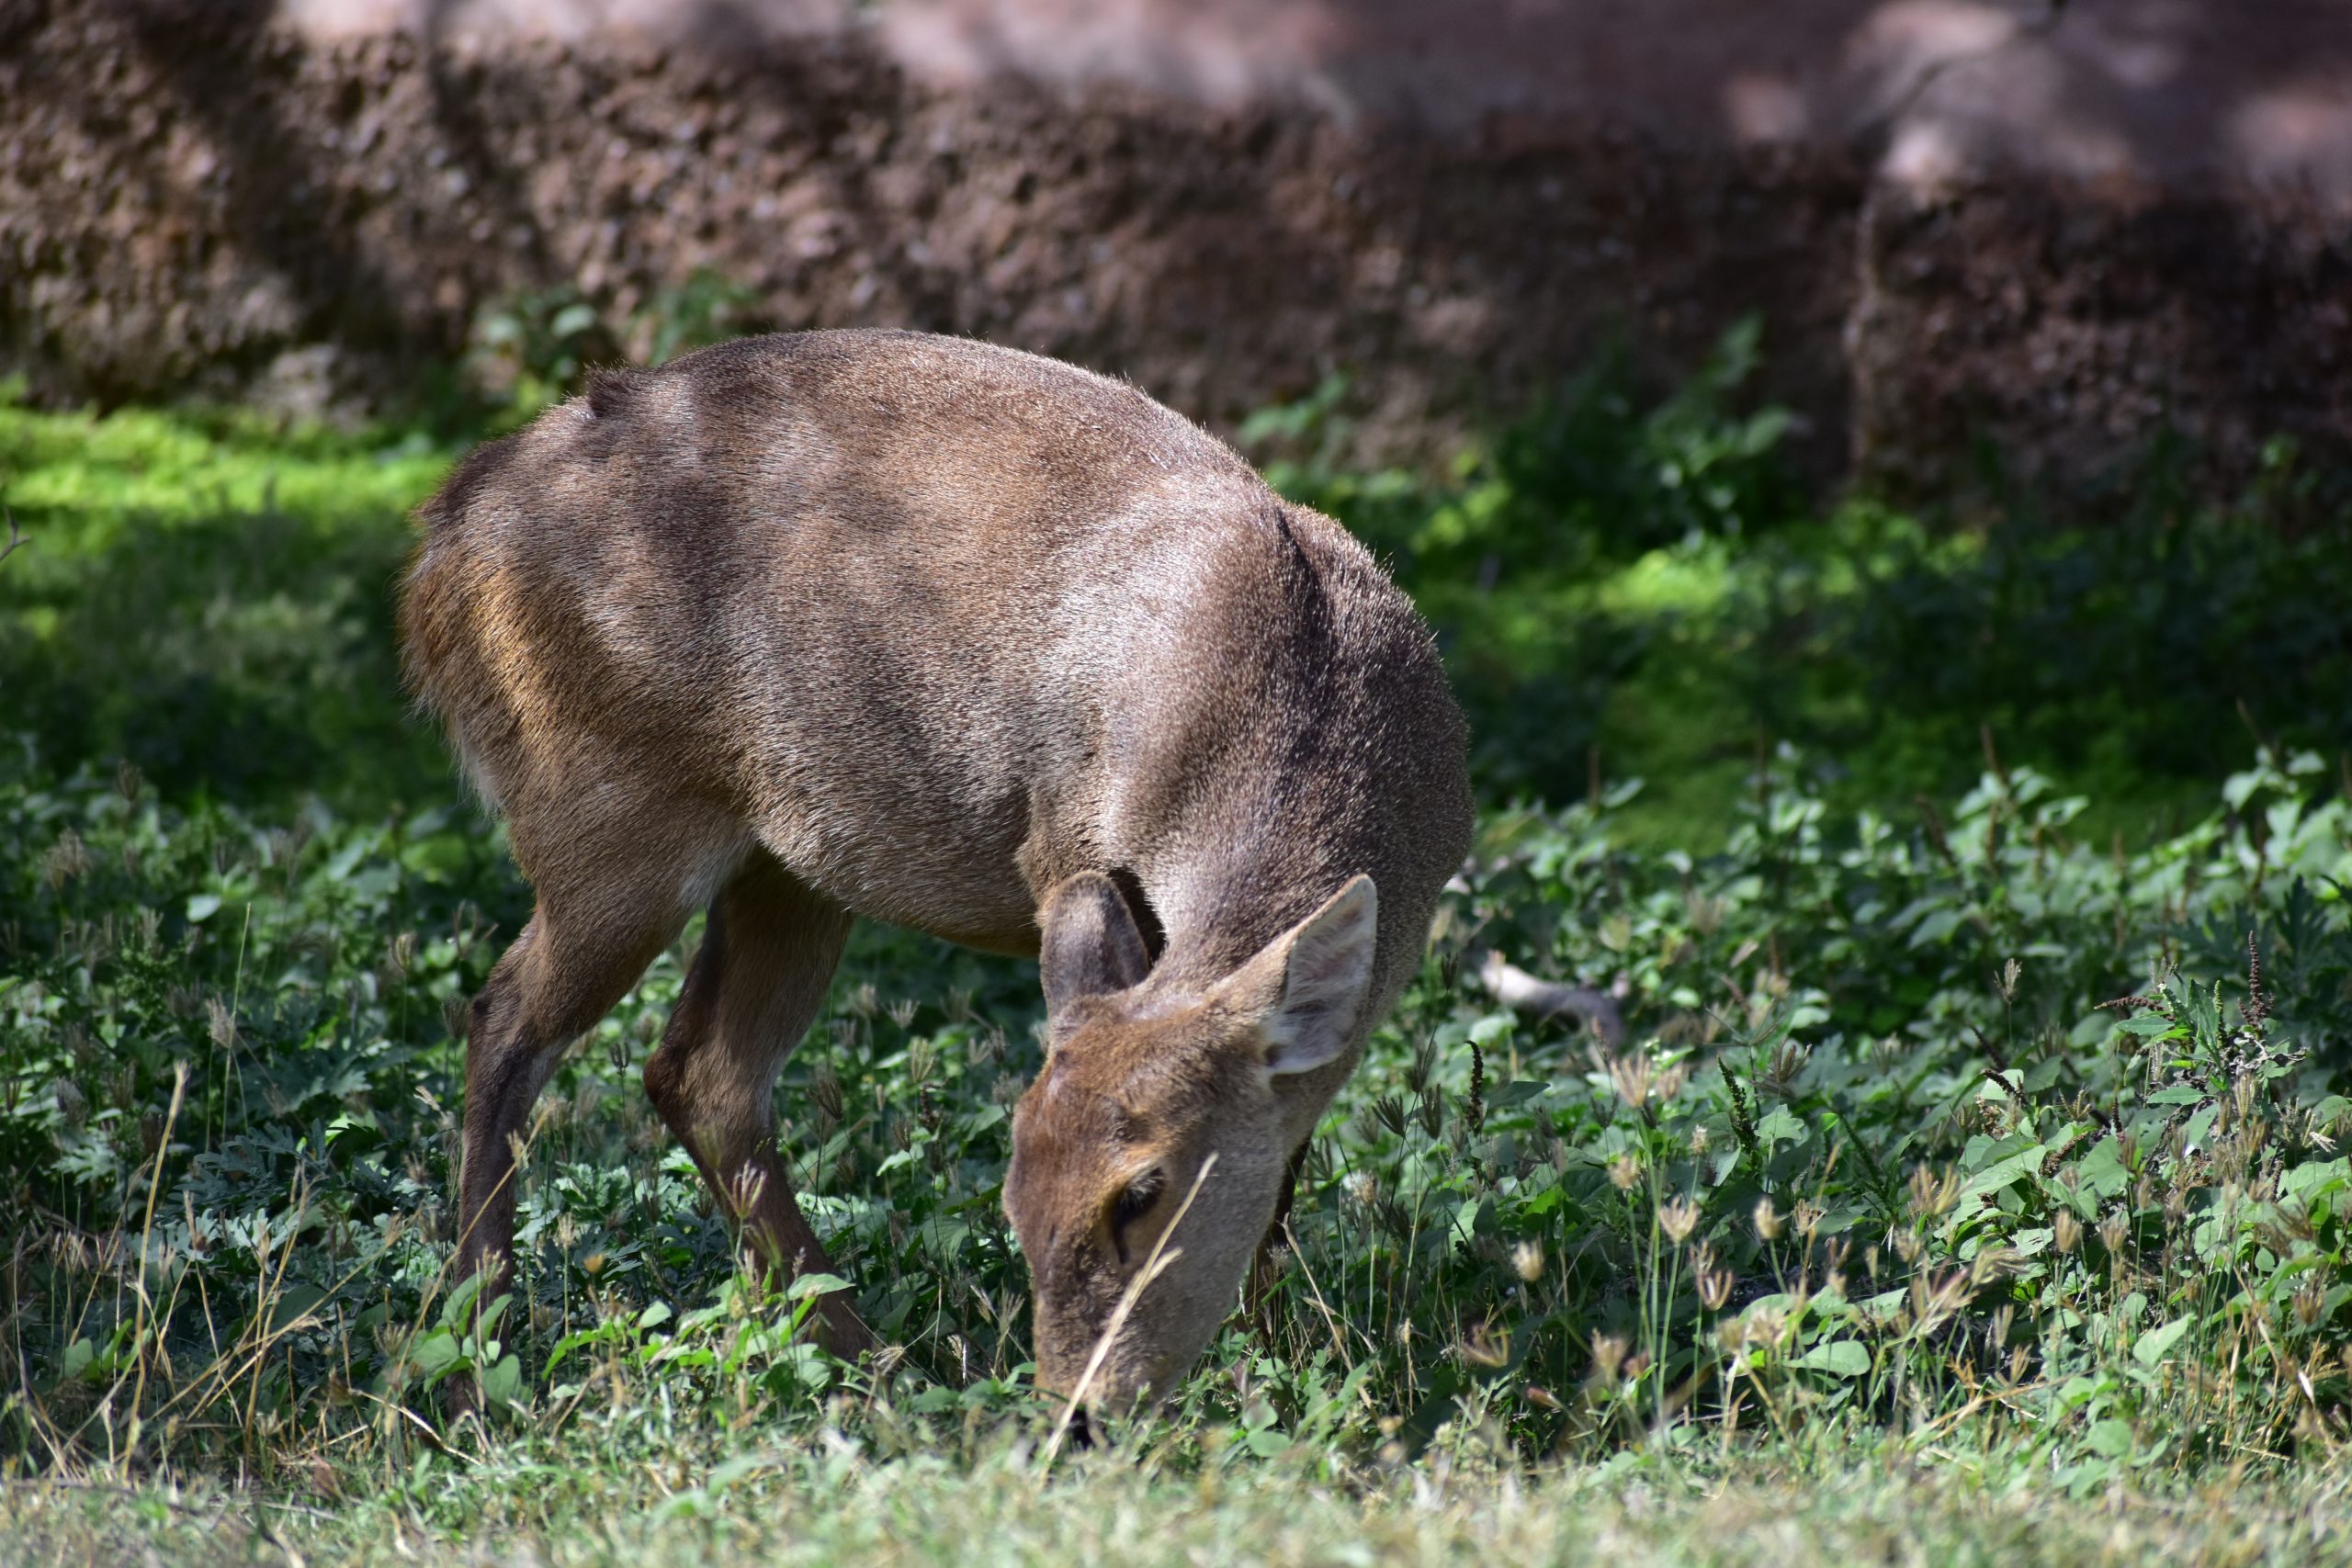 Hog deer grazing in the forest